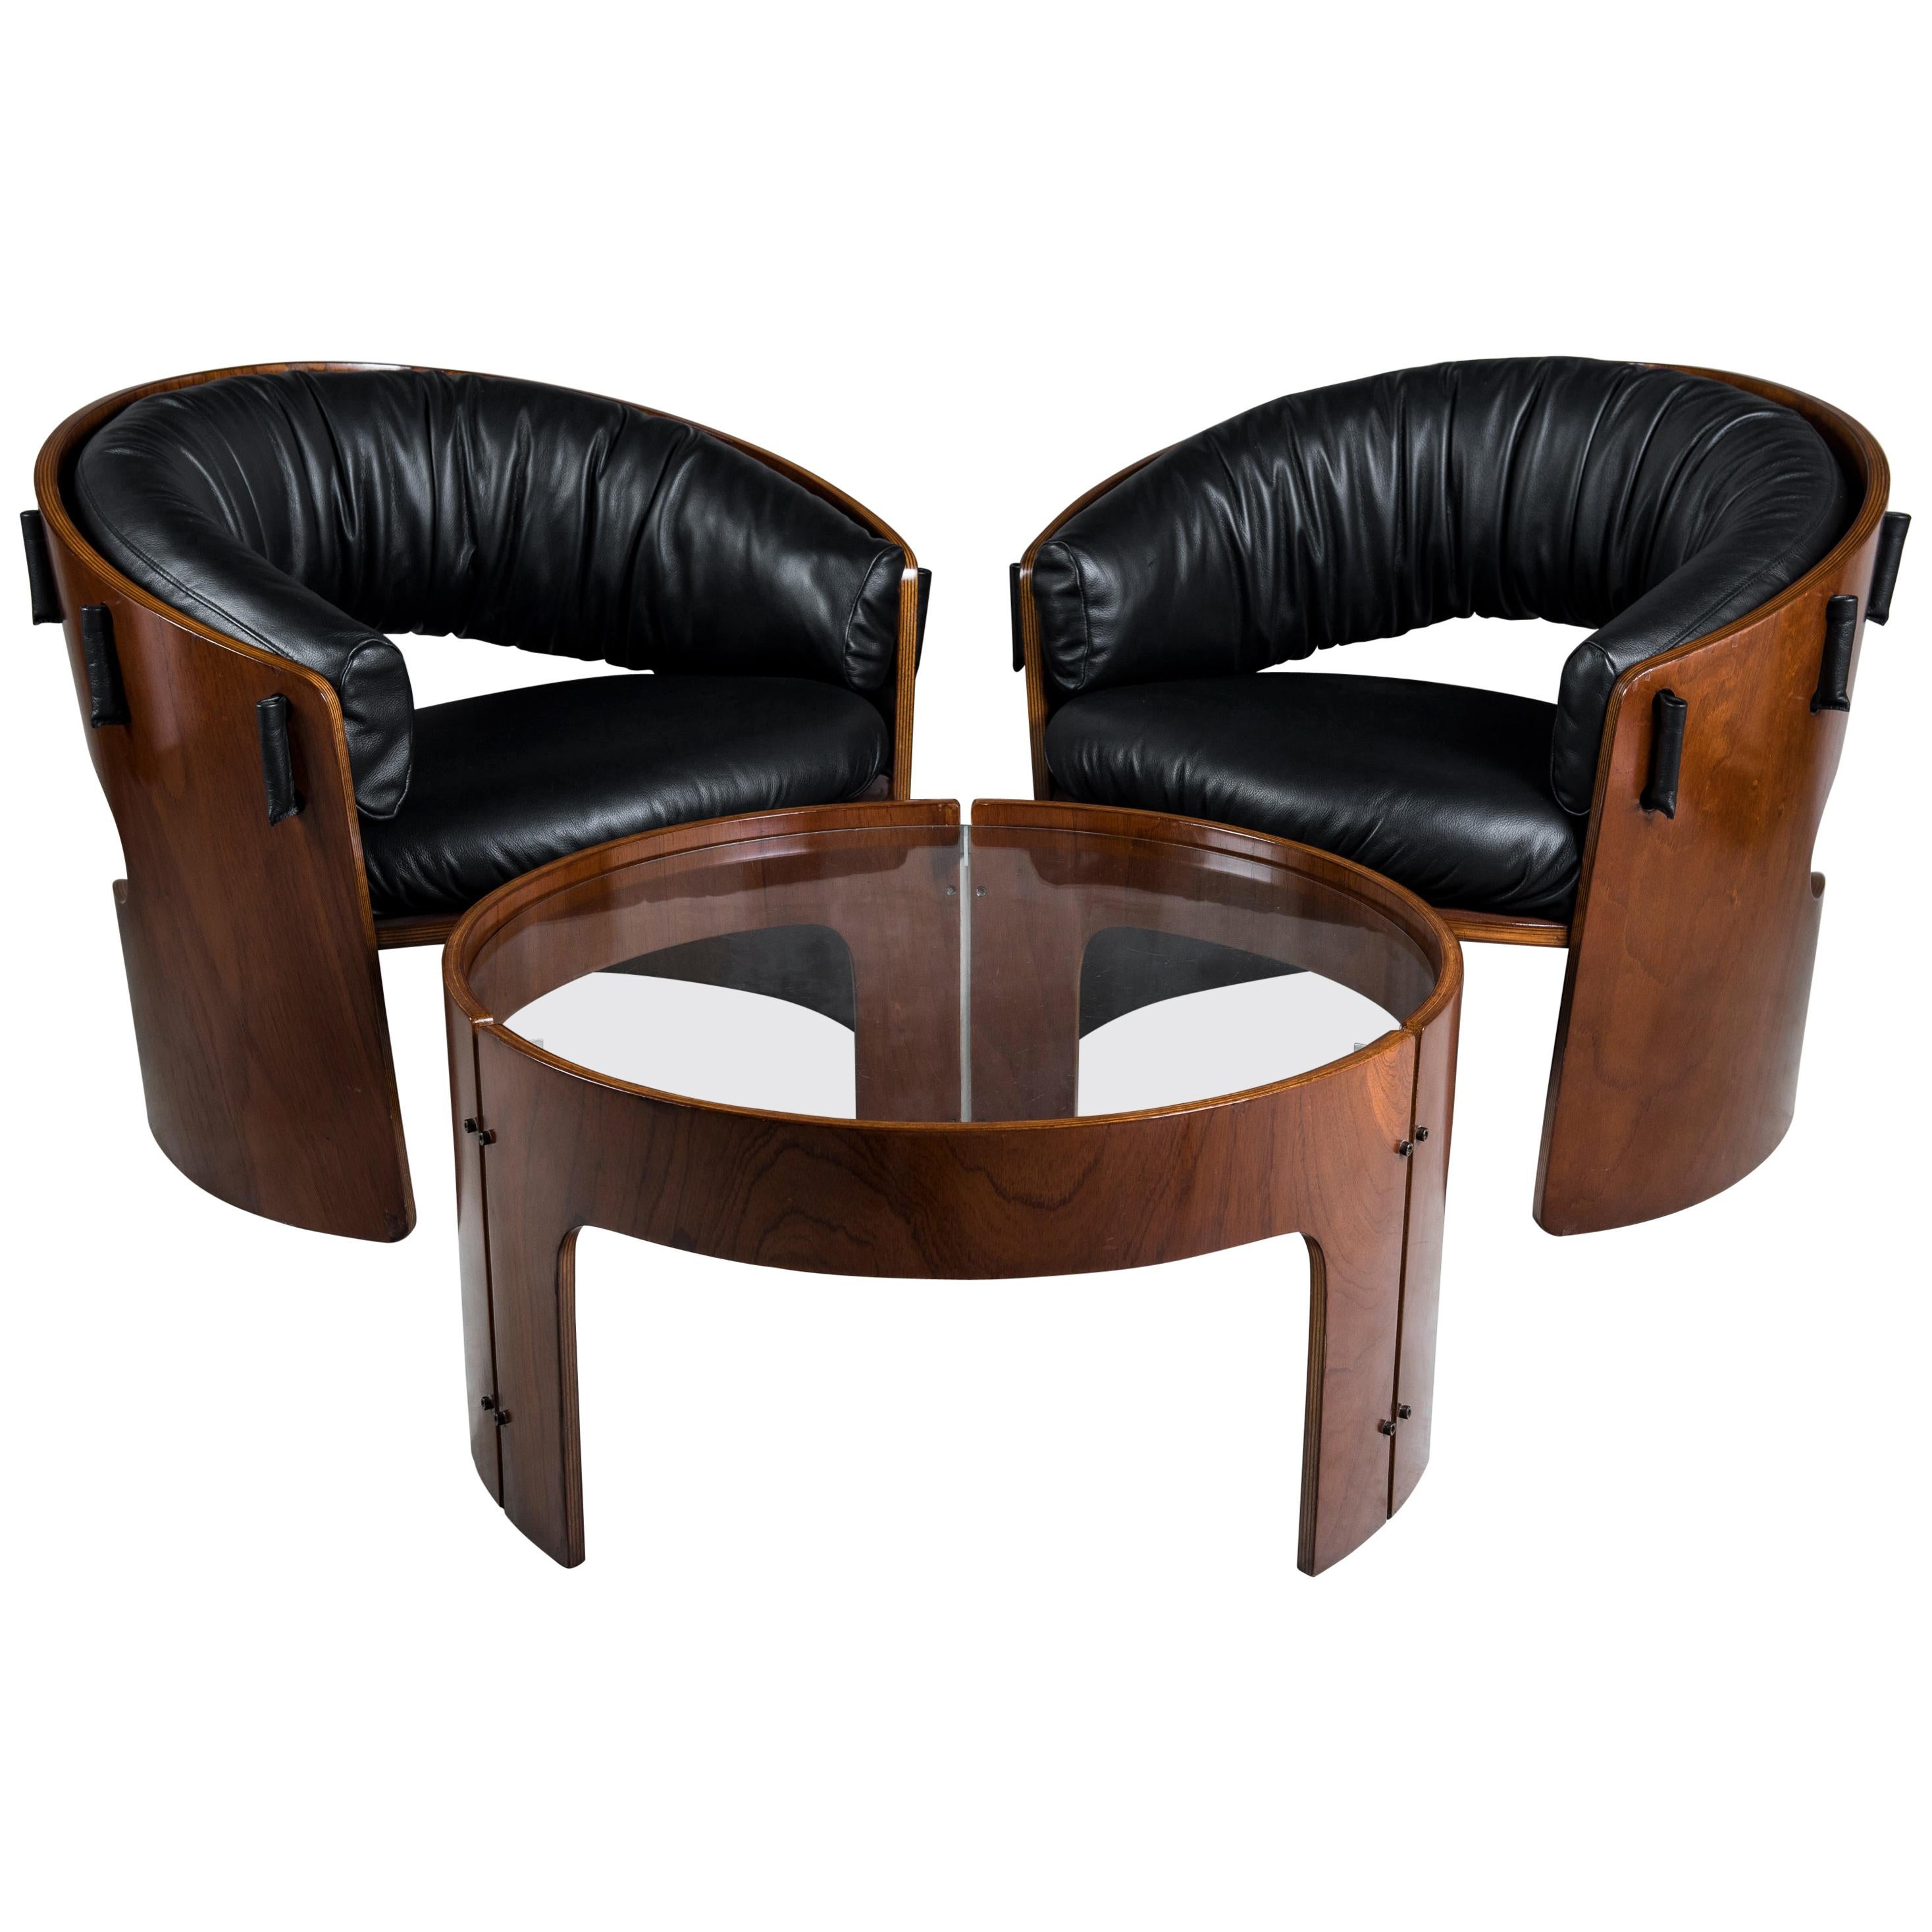 Set of Pair of Wood and Leather Armchairs with Coffee Table by Ricardo Blanco